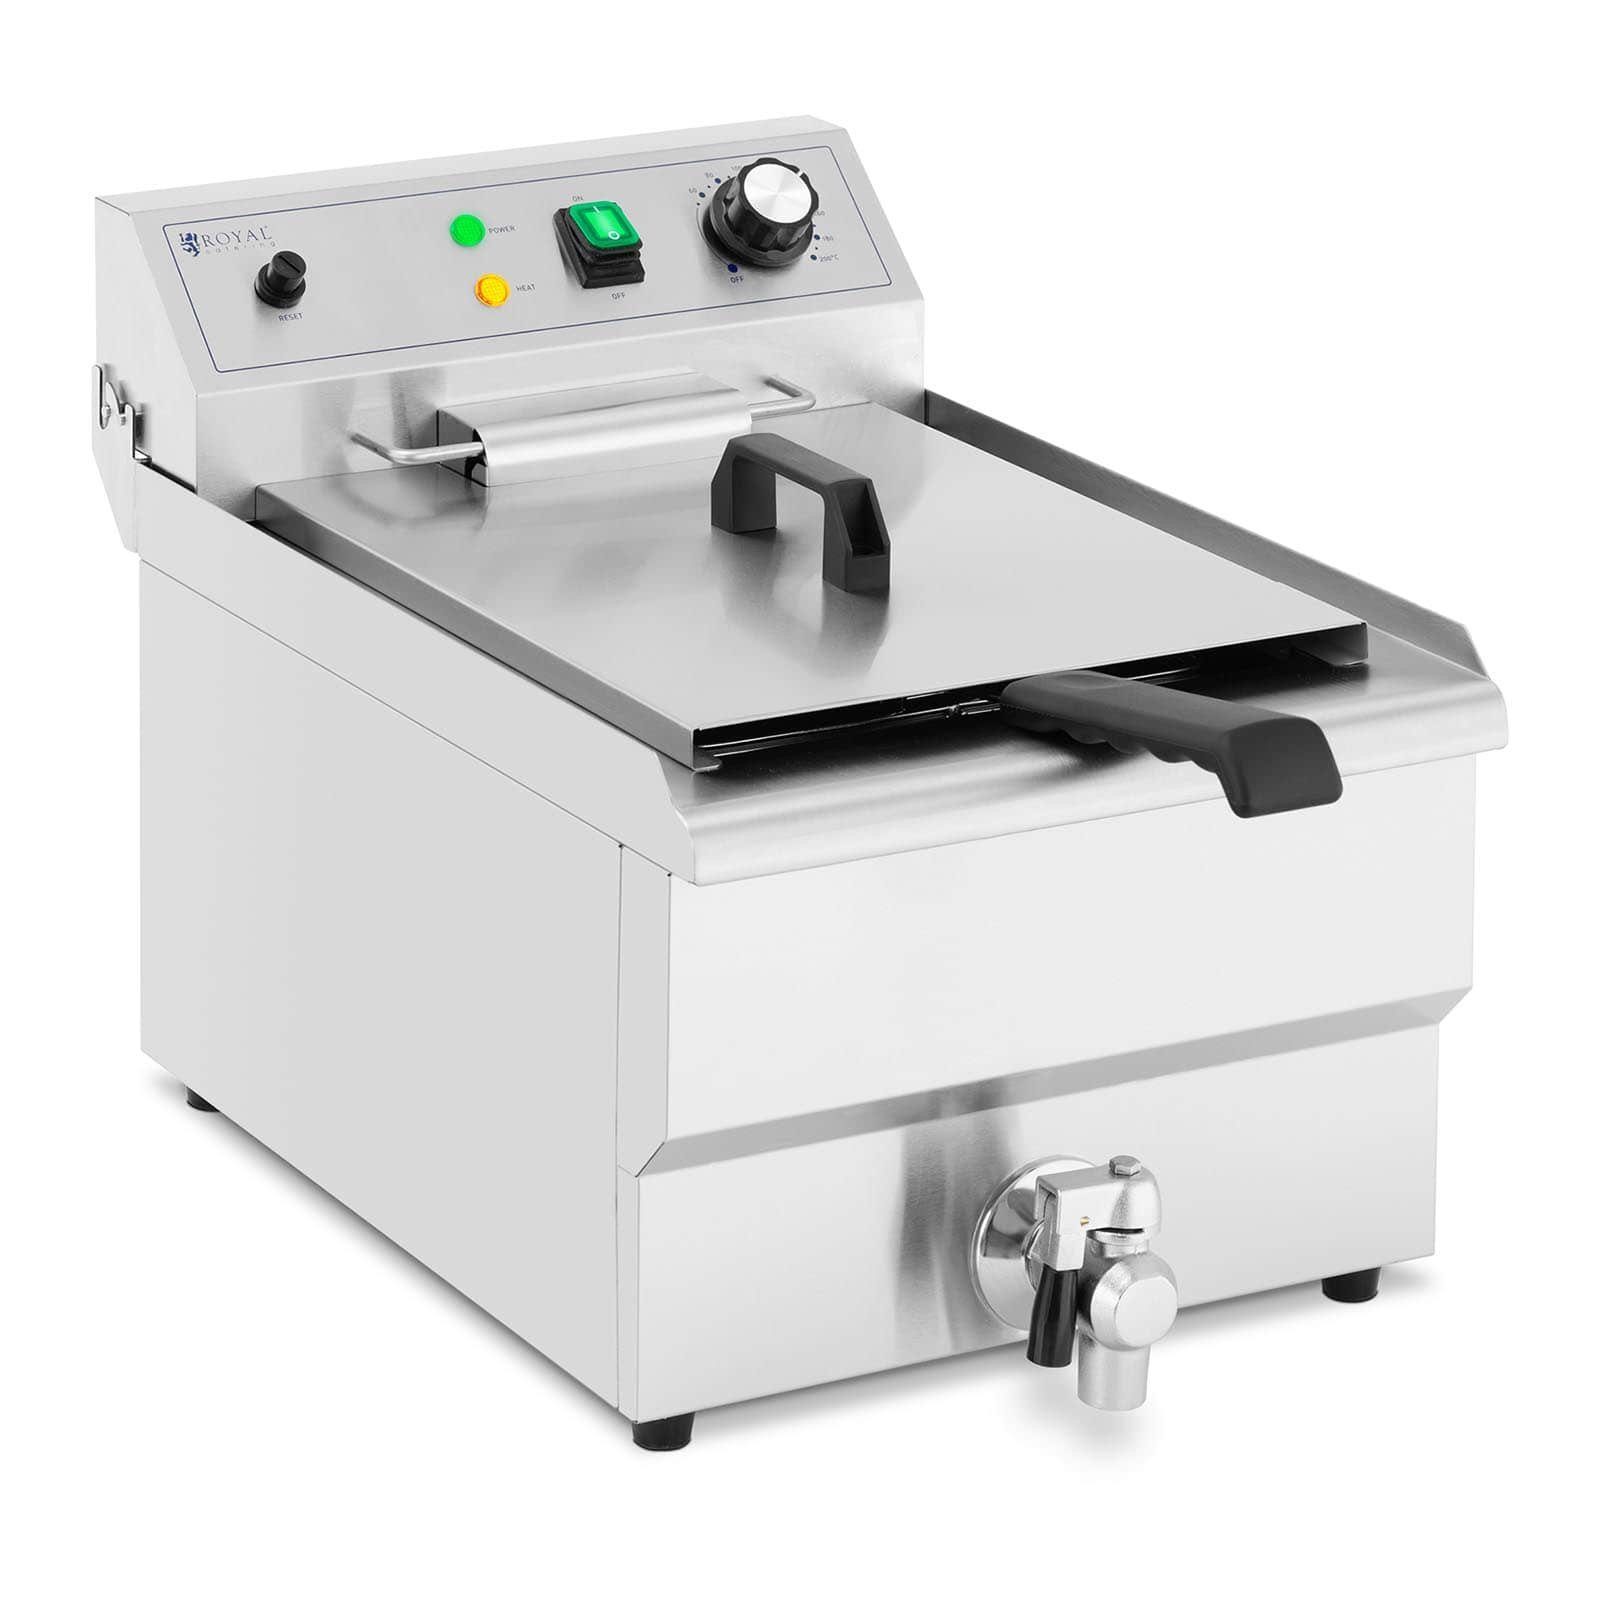 Royal Catering Fritteuse Kaltzonen W, W Fritteuse 13 3000 Fritteuse Elektro-Fritteuse 3.000 Gastro L